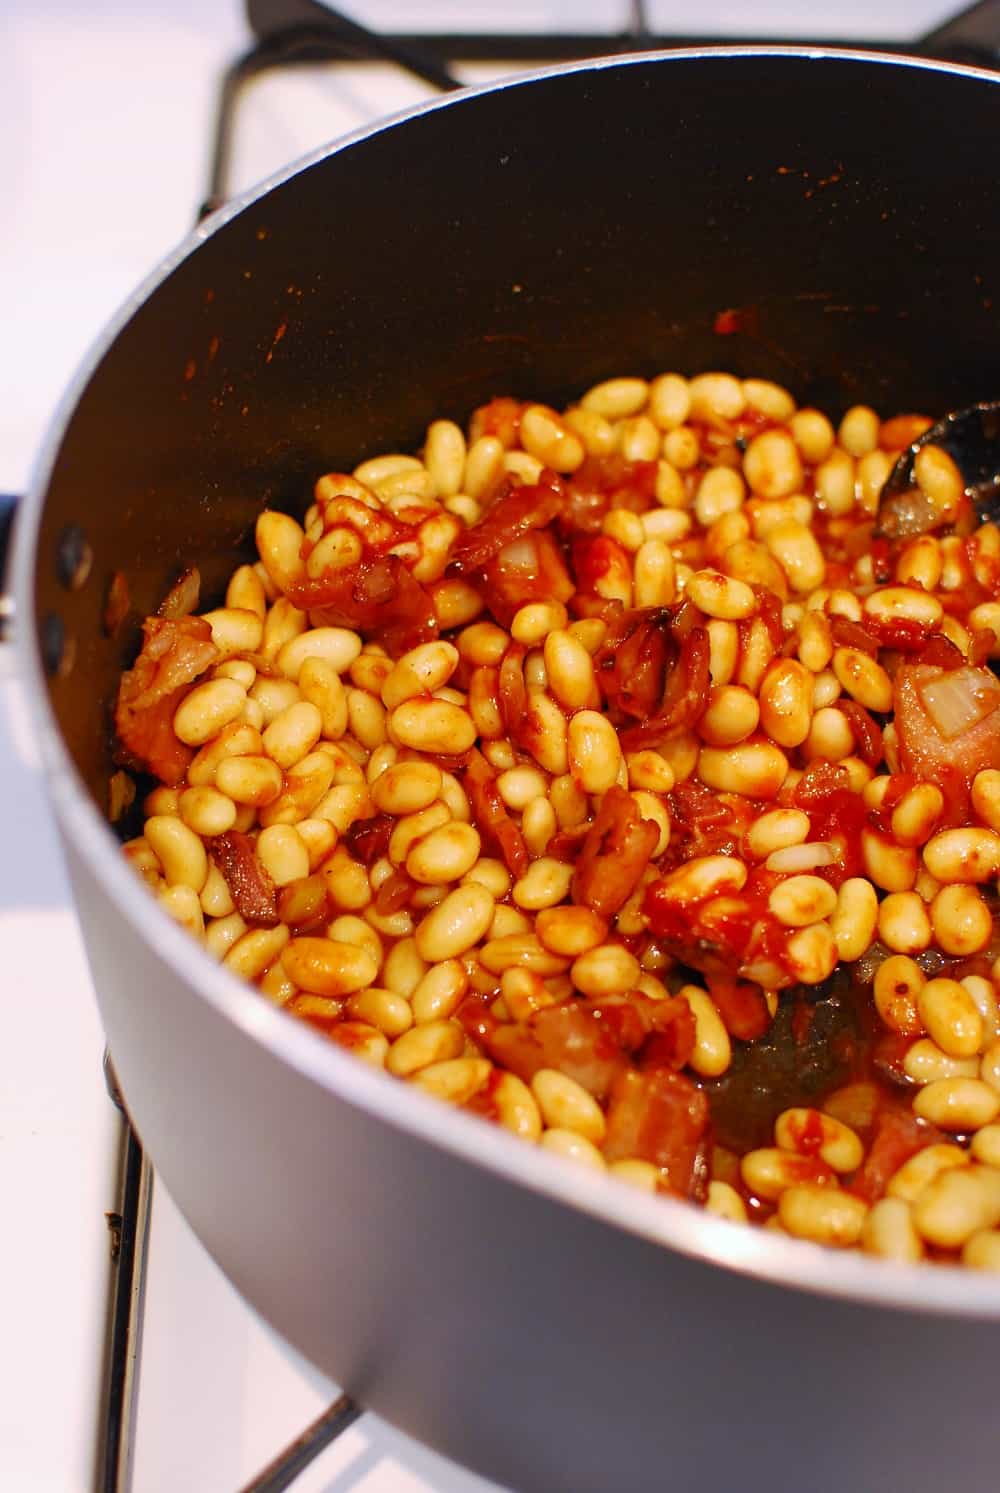 A pot full of ingredients for healthy baked beans